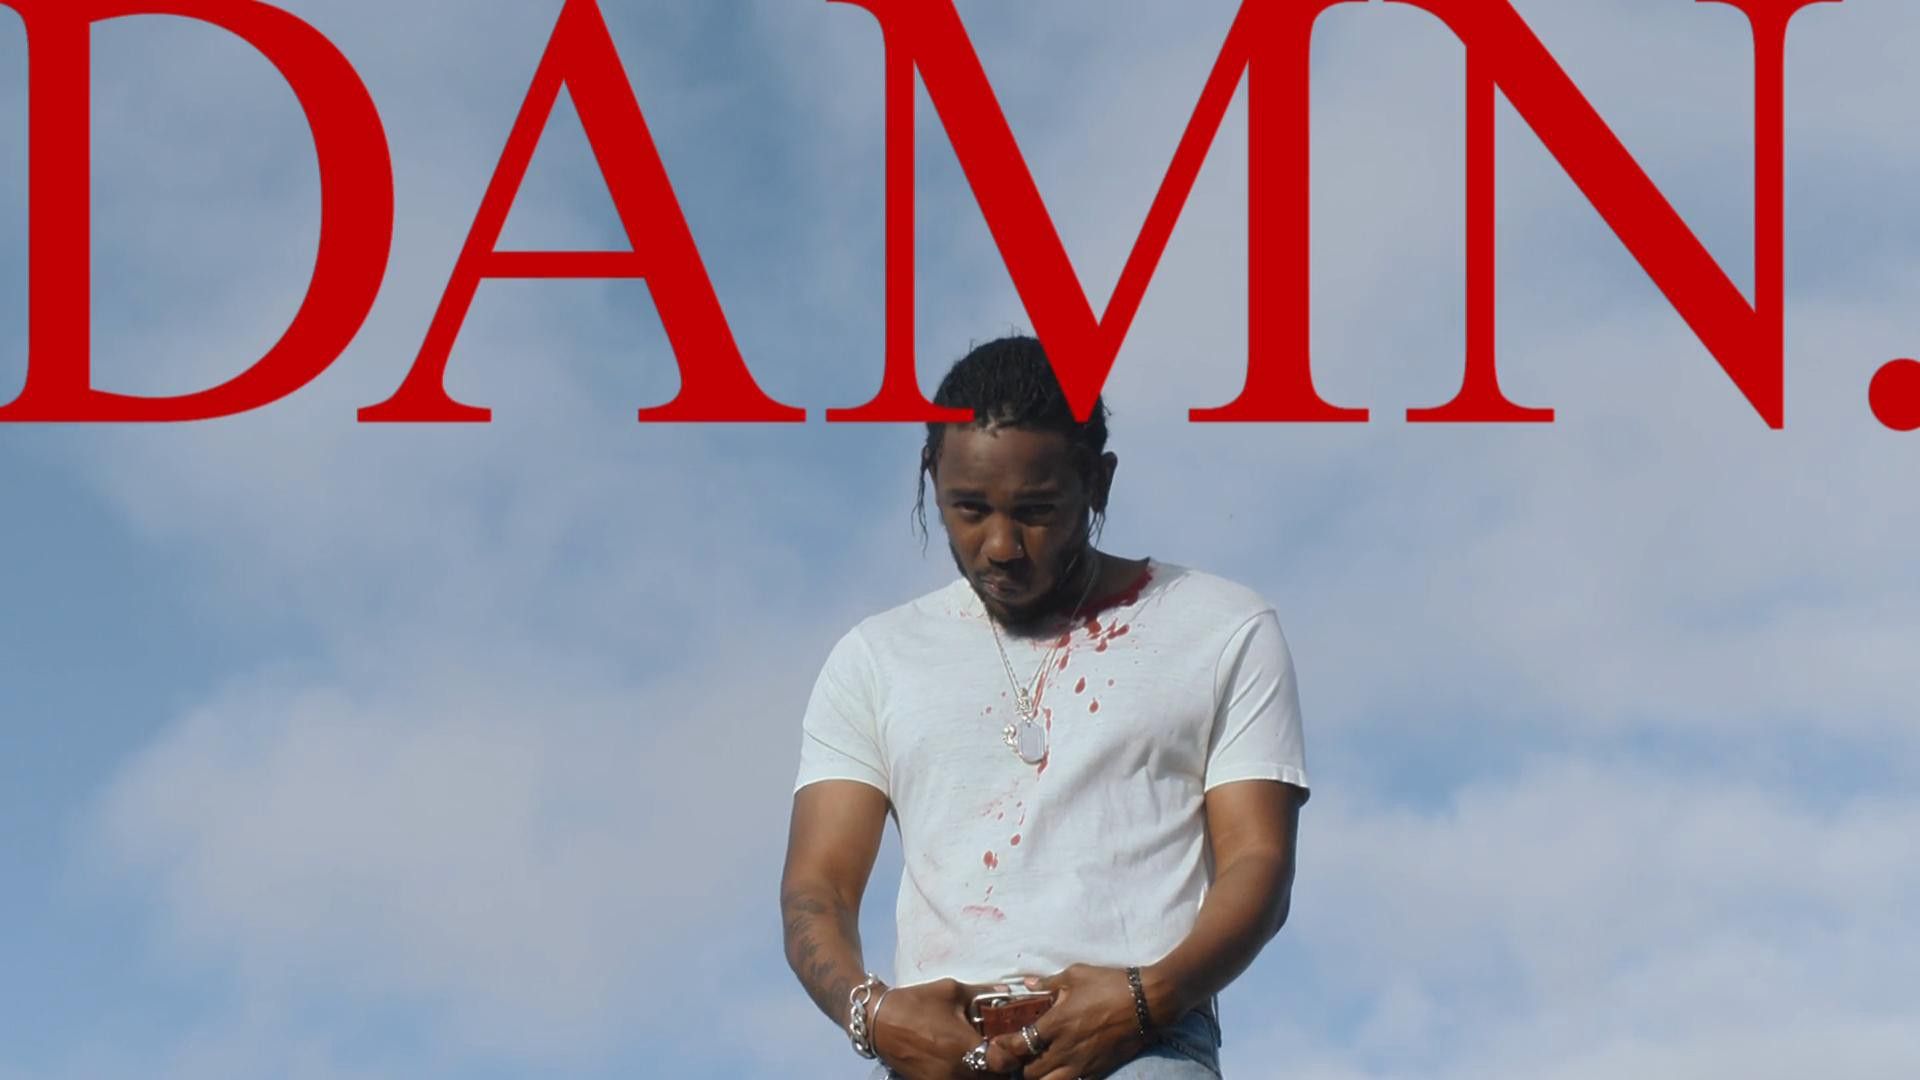 Why “DAMN” is Kendrick Lamar's most important album.